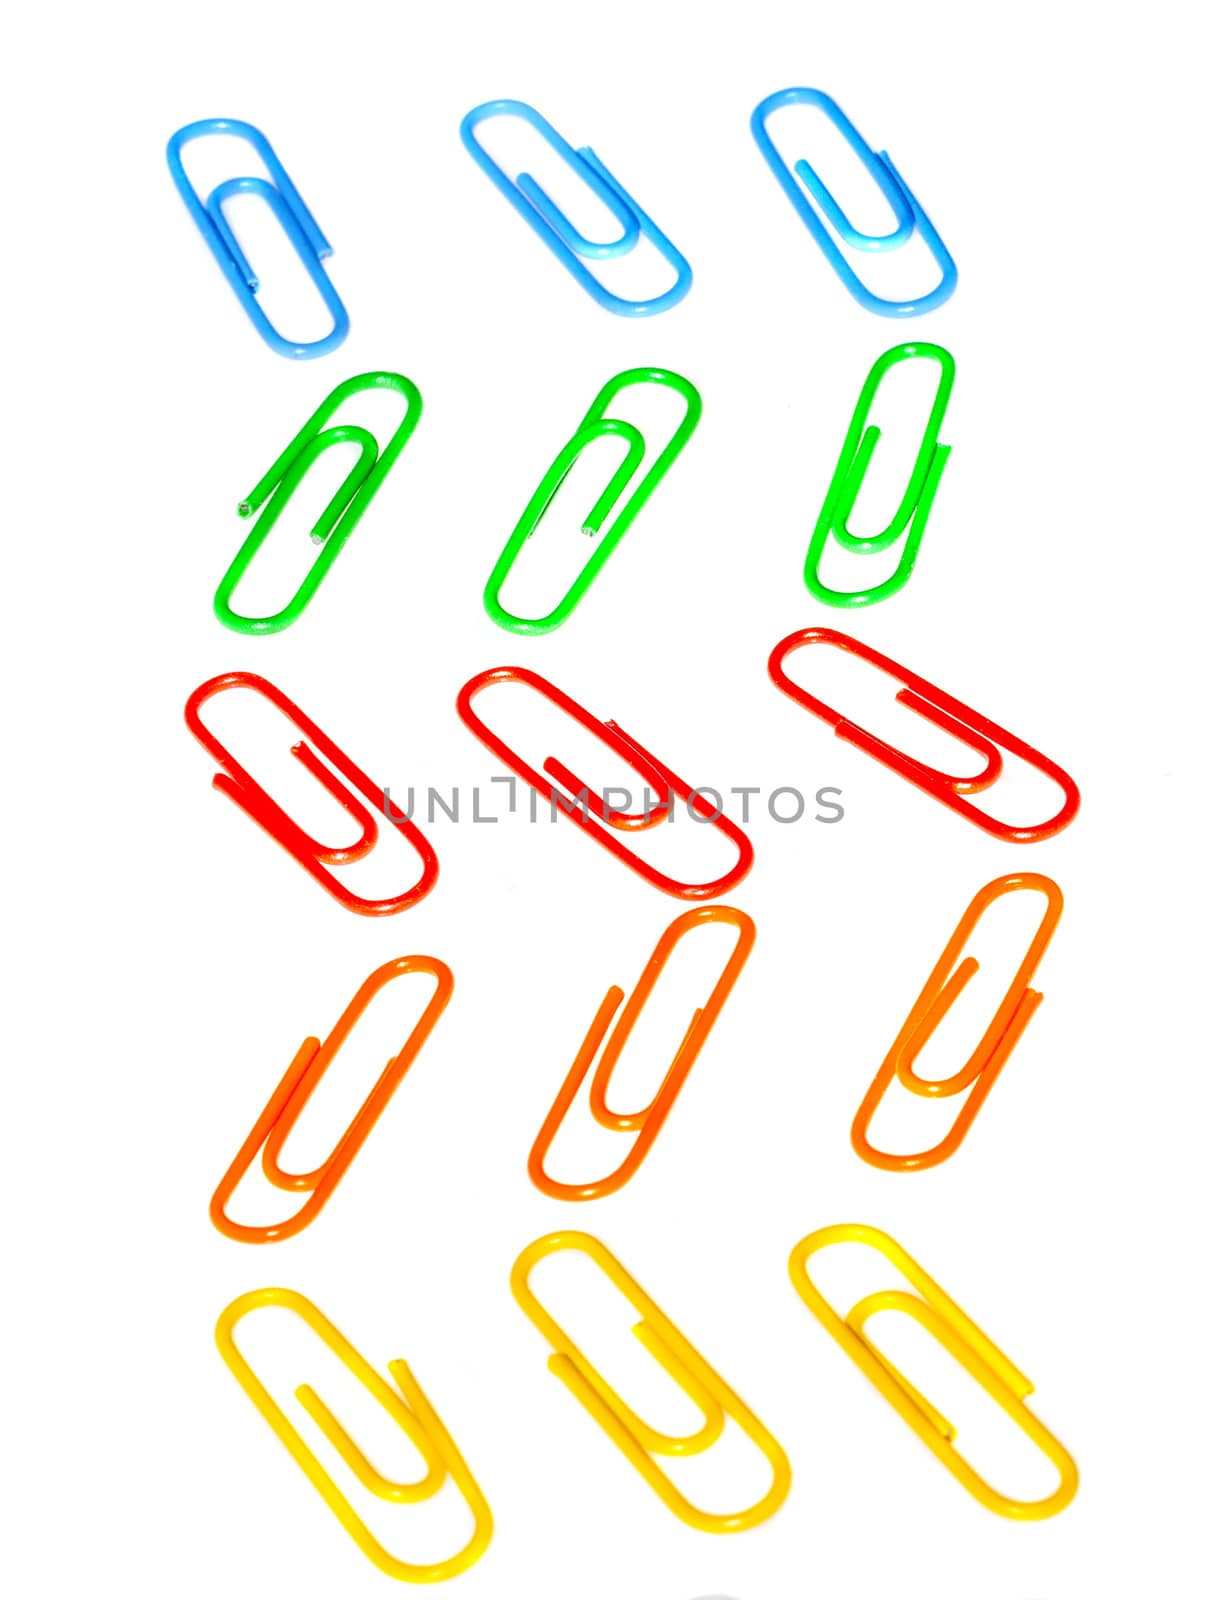 Color photo paperclips on a white background